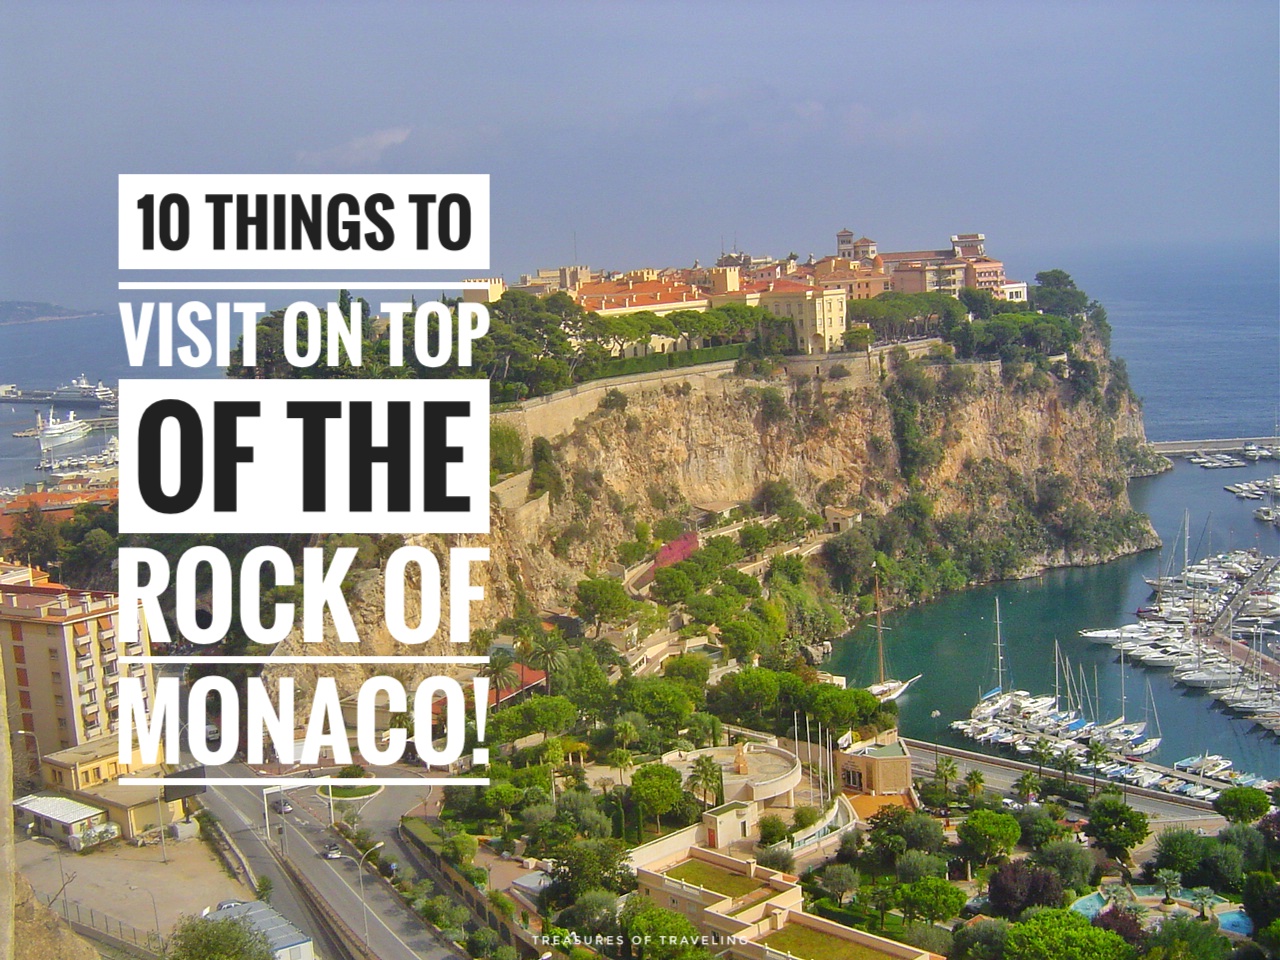 10 Things to Visit on Top of the Rock of Monaco!